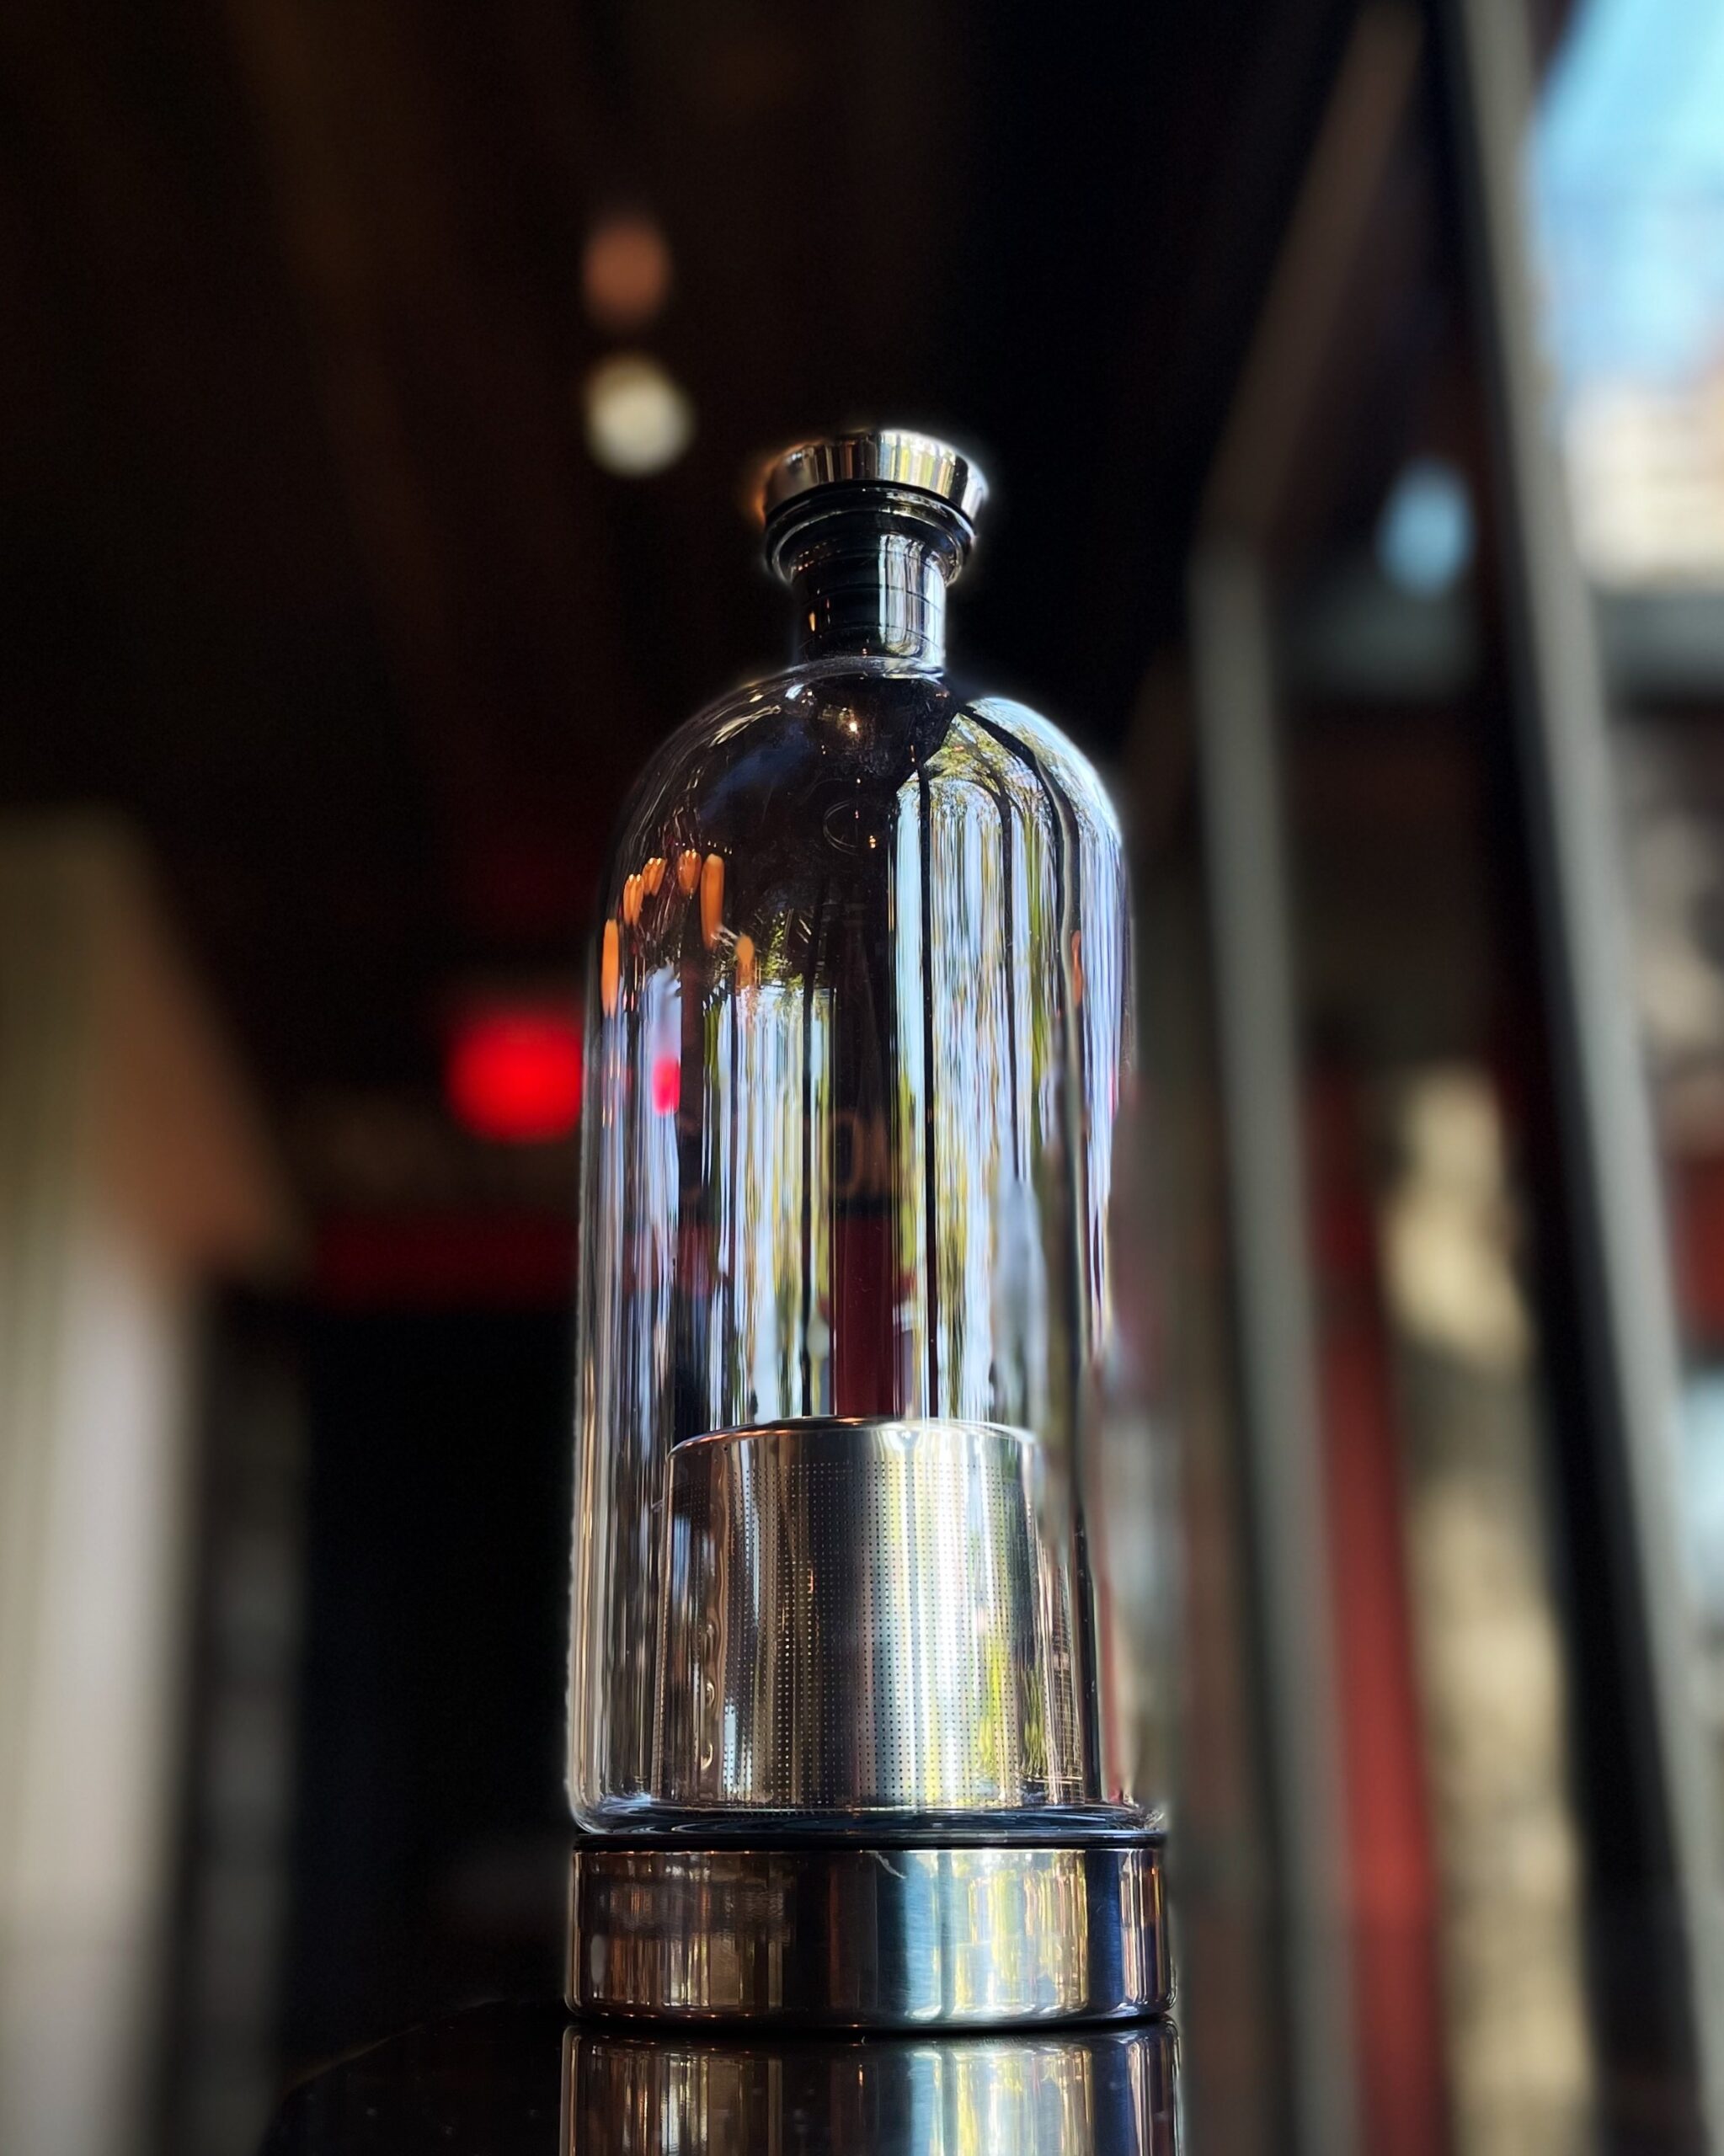 Infusion Carafe